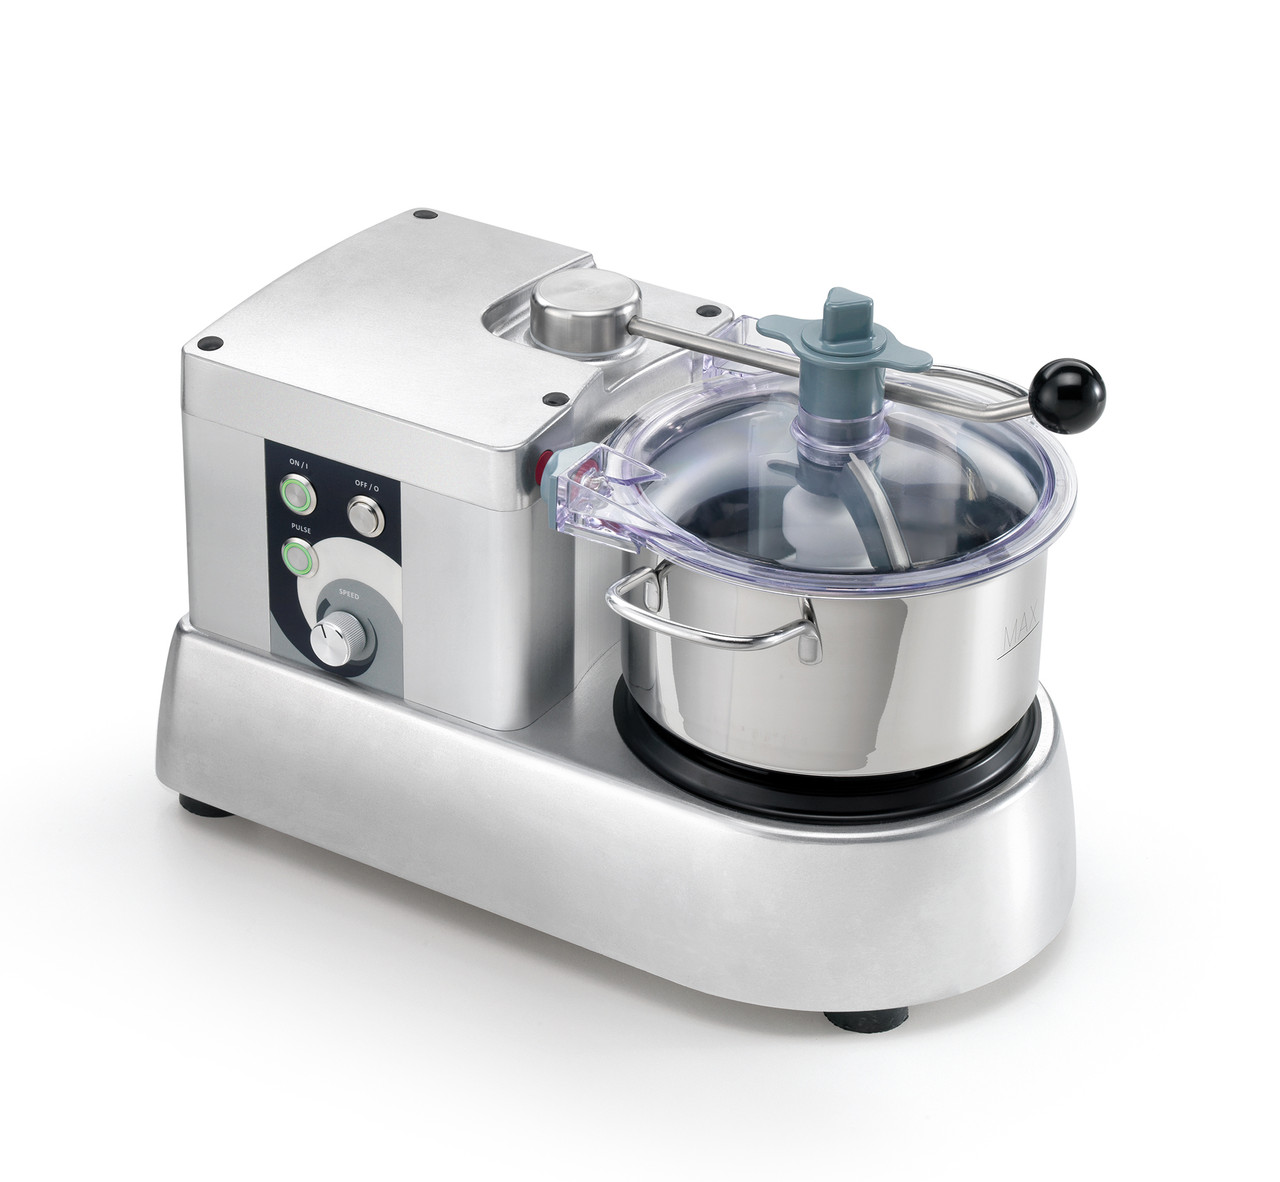 Eurodib 3.3L (0.87 gal) Continuous Commercial Food Processor, Model# CTRONIC 4VT